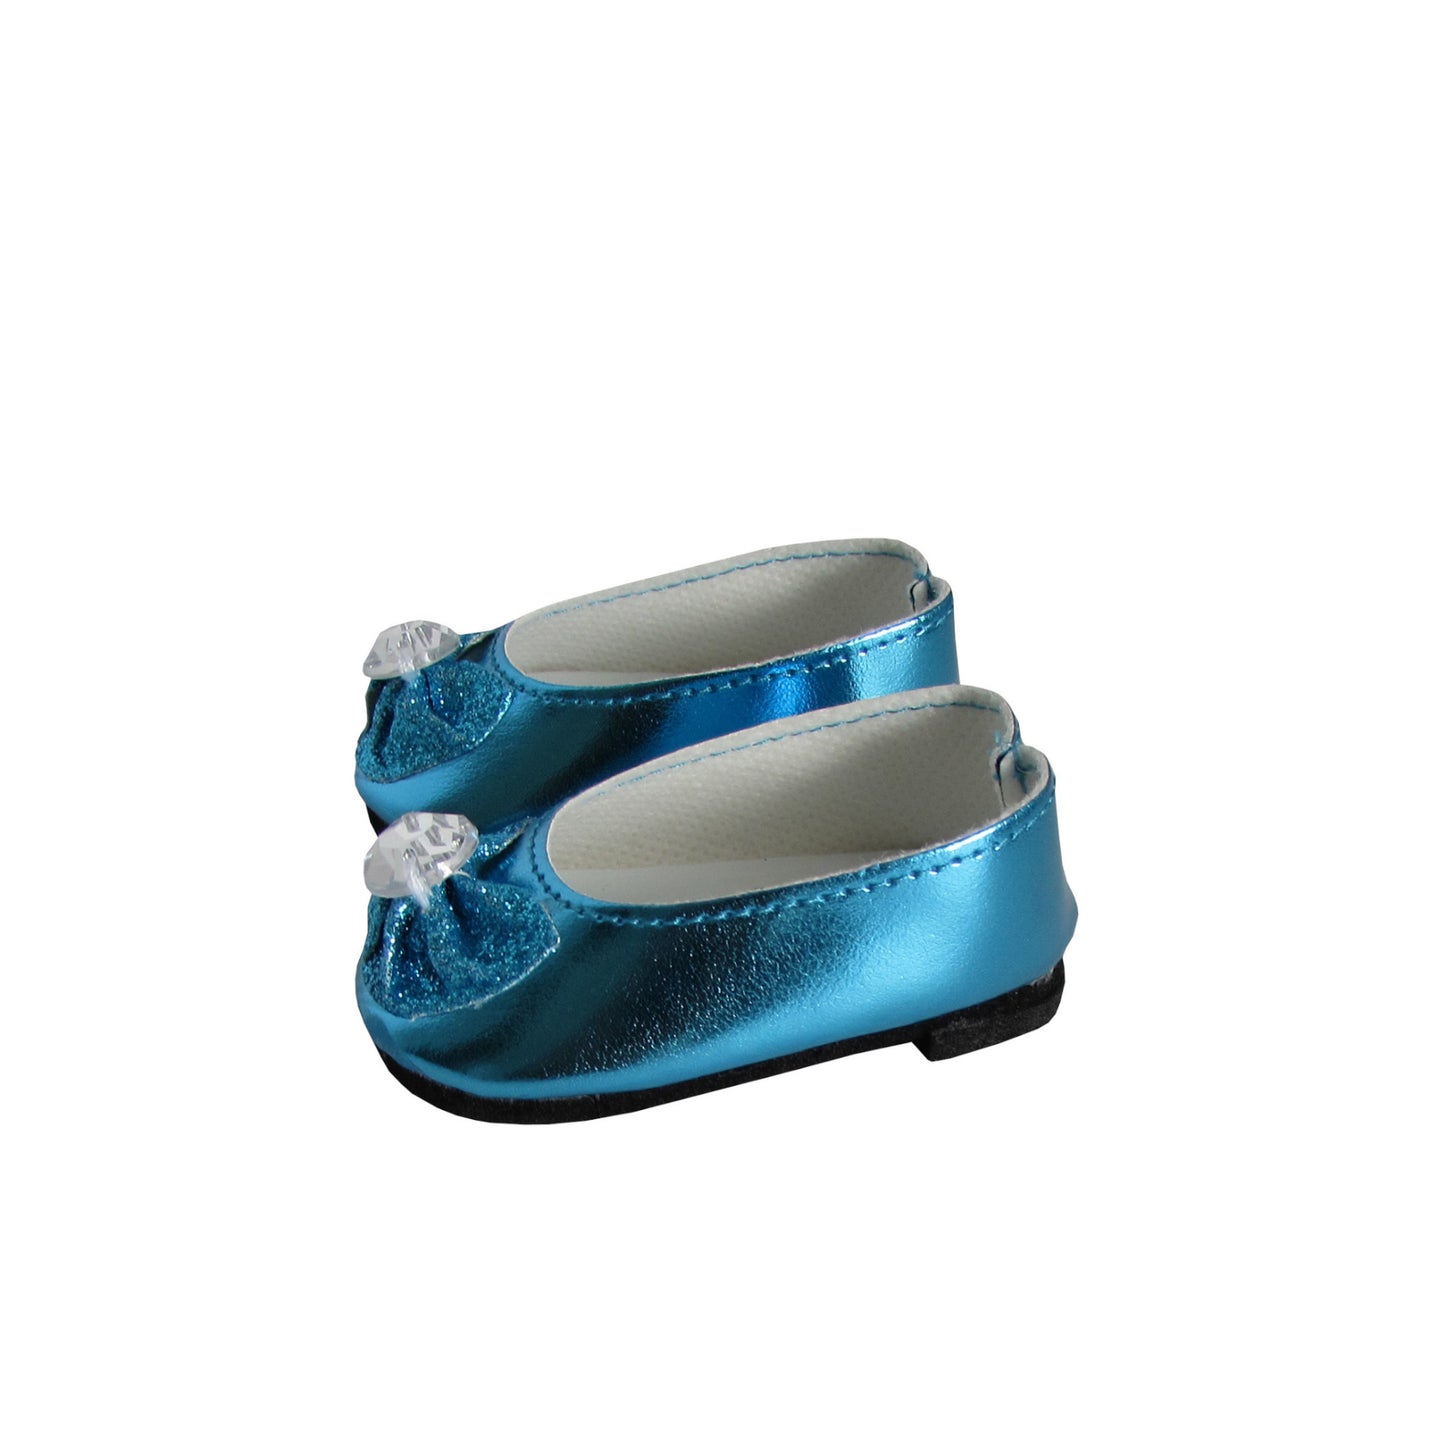 Teal Glitter Bow Flats for 18-inch dolls Left